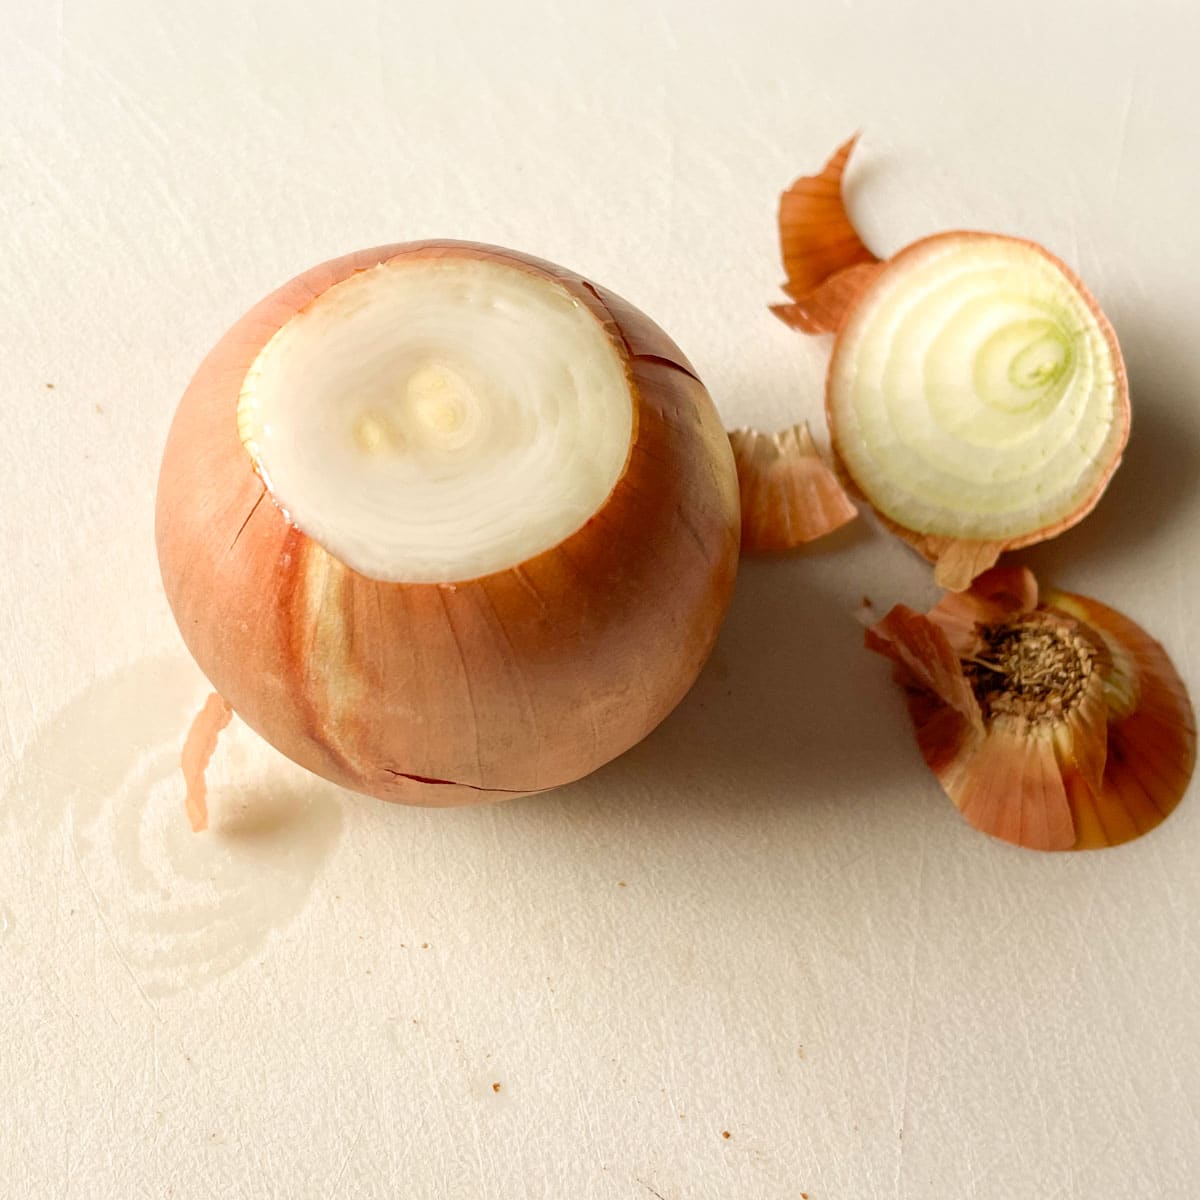 An onion is shown with the top and bottom portions cut off.